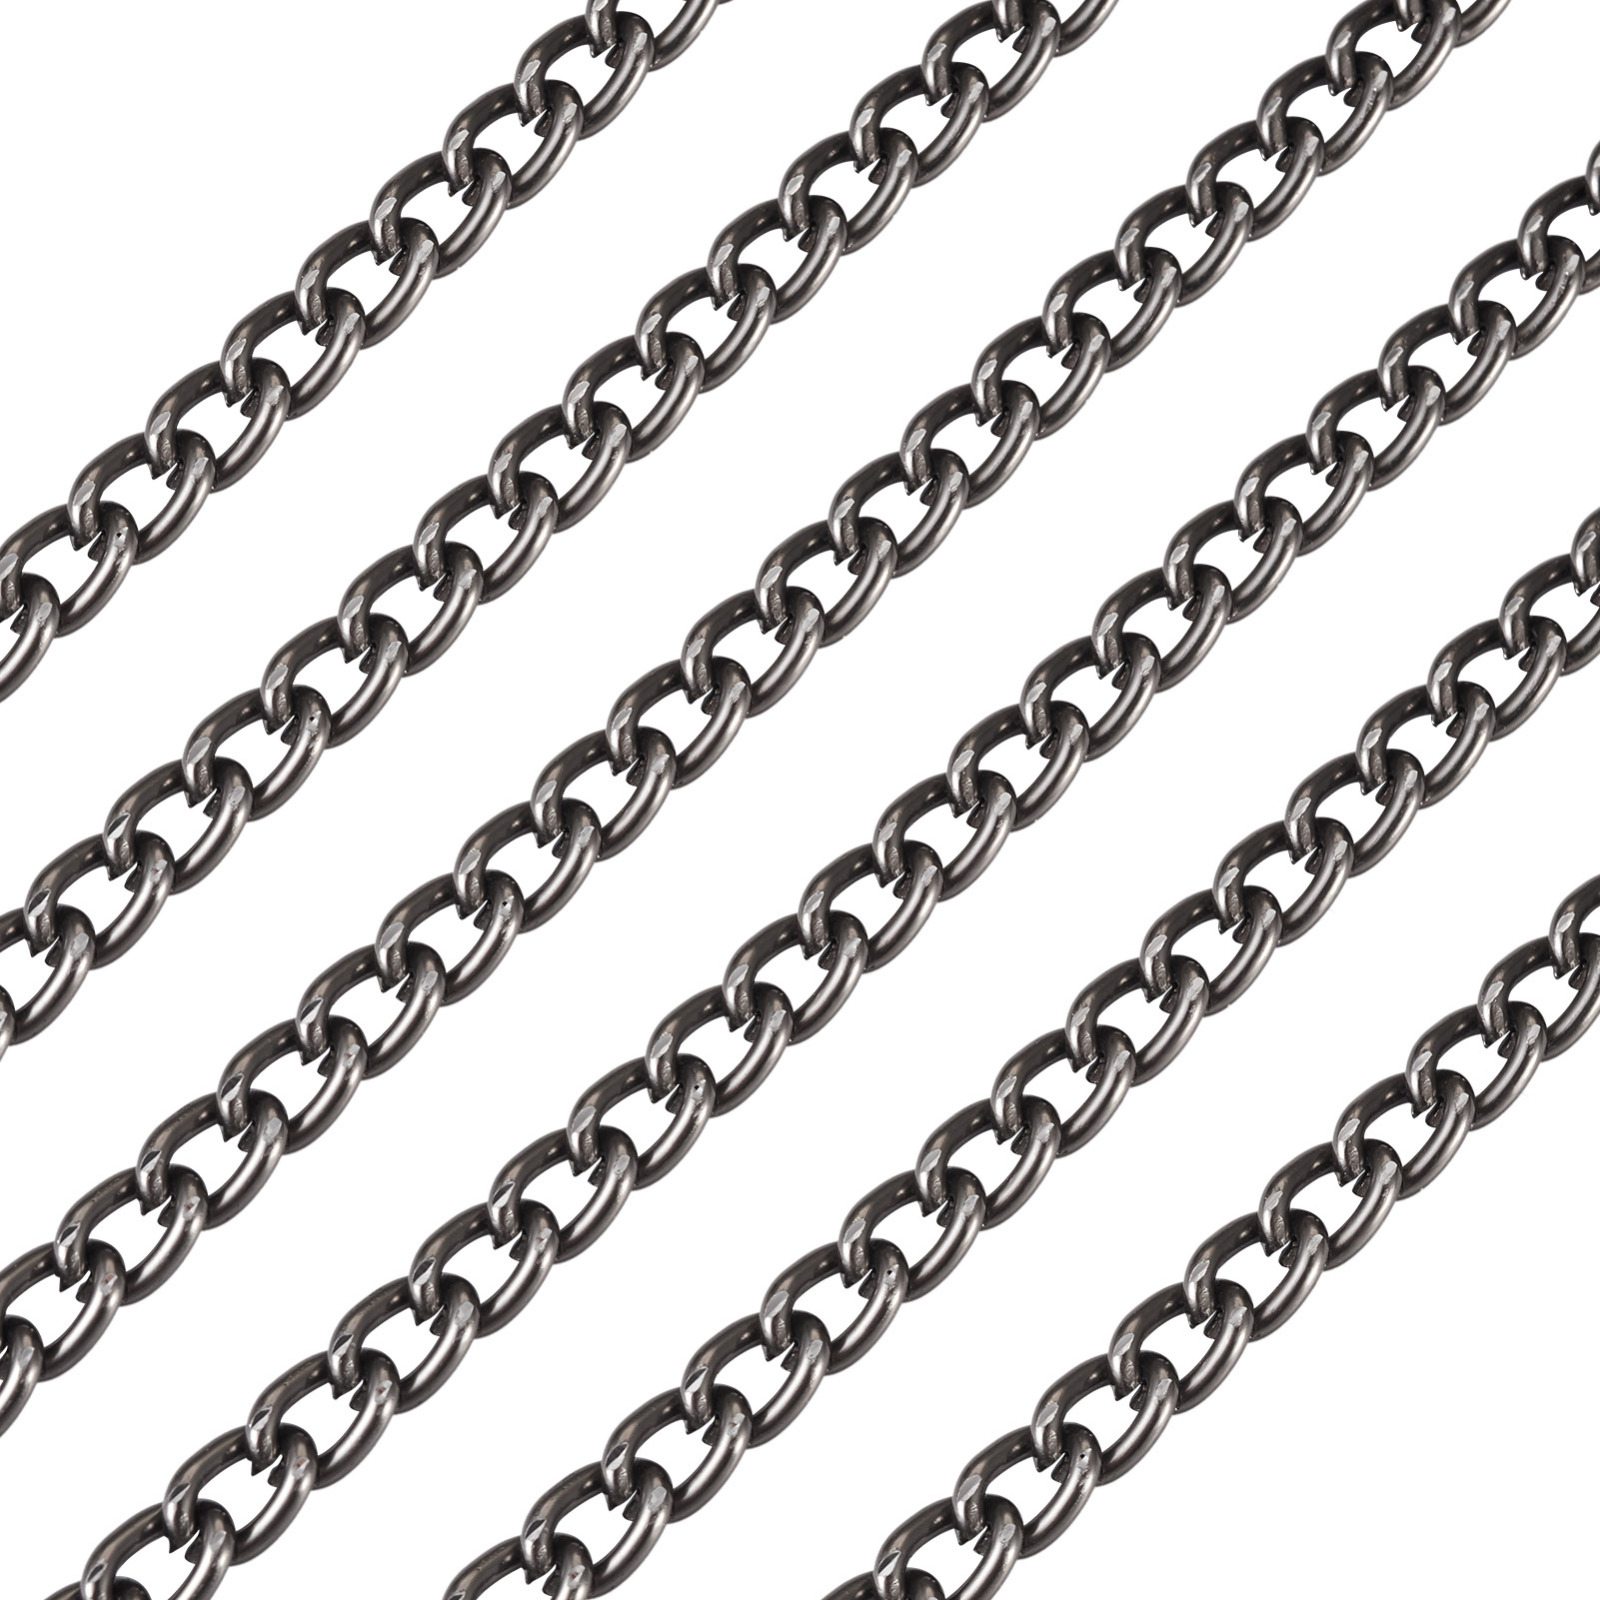 Aluminium Curb Chain Roll, Thick Oval Twisted Chain Links, Black